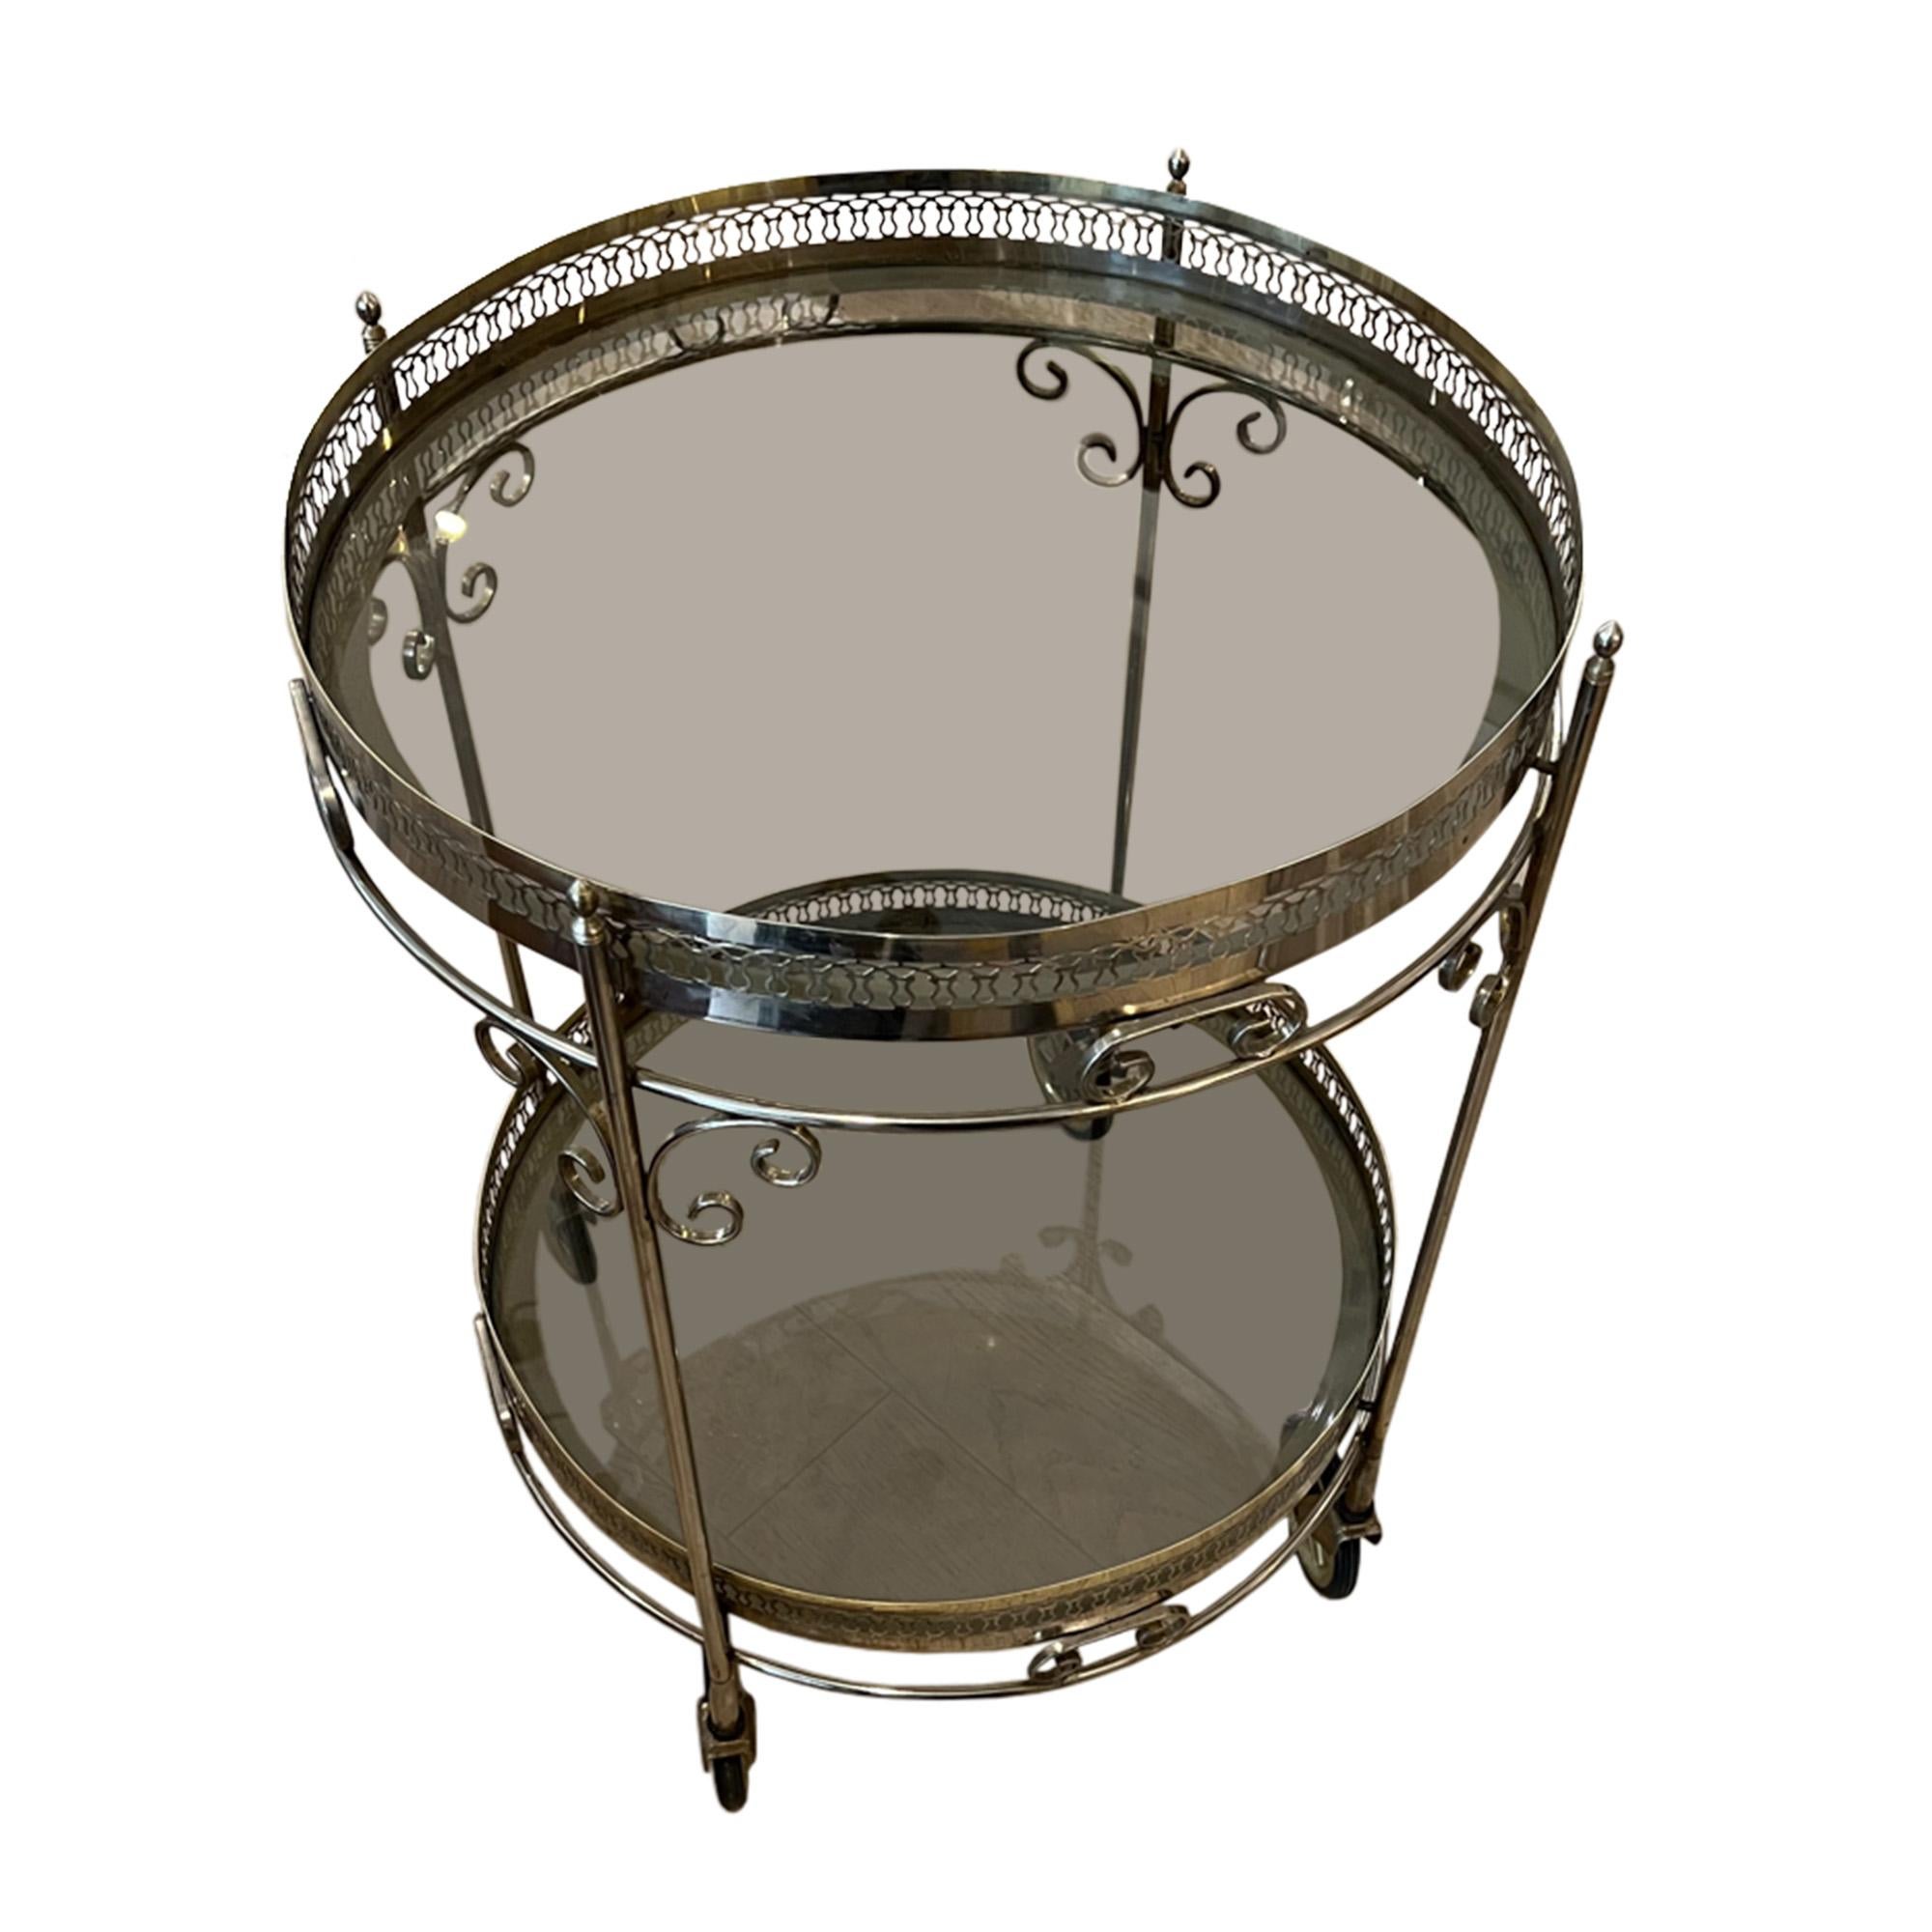 This unusual mid century bar cart was made in France in the 1960s - please take a look at all the pictures to see a close up on the finials and detail on the metal work.

The glass is slightly smoked and the brass patina is more silver than gold.